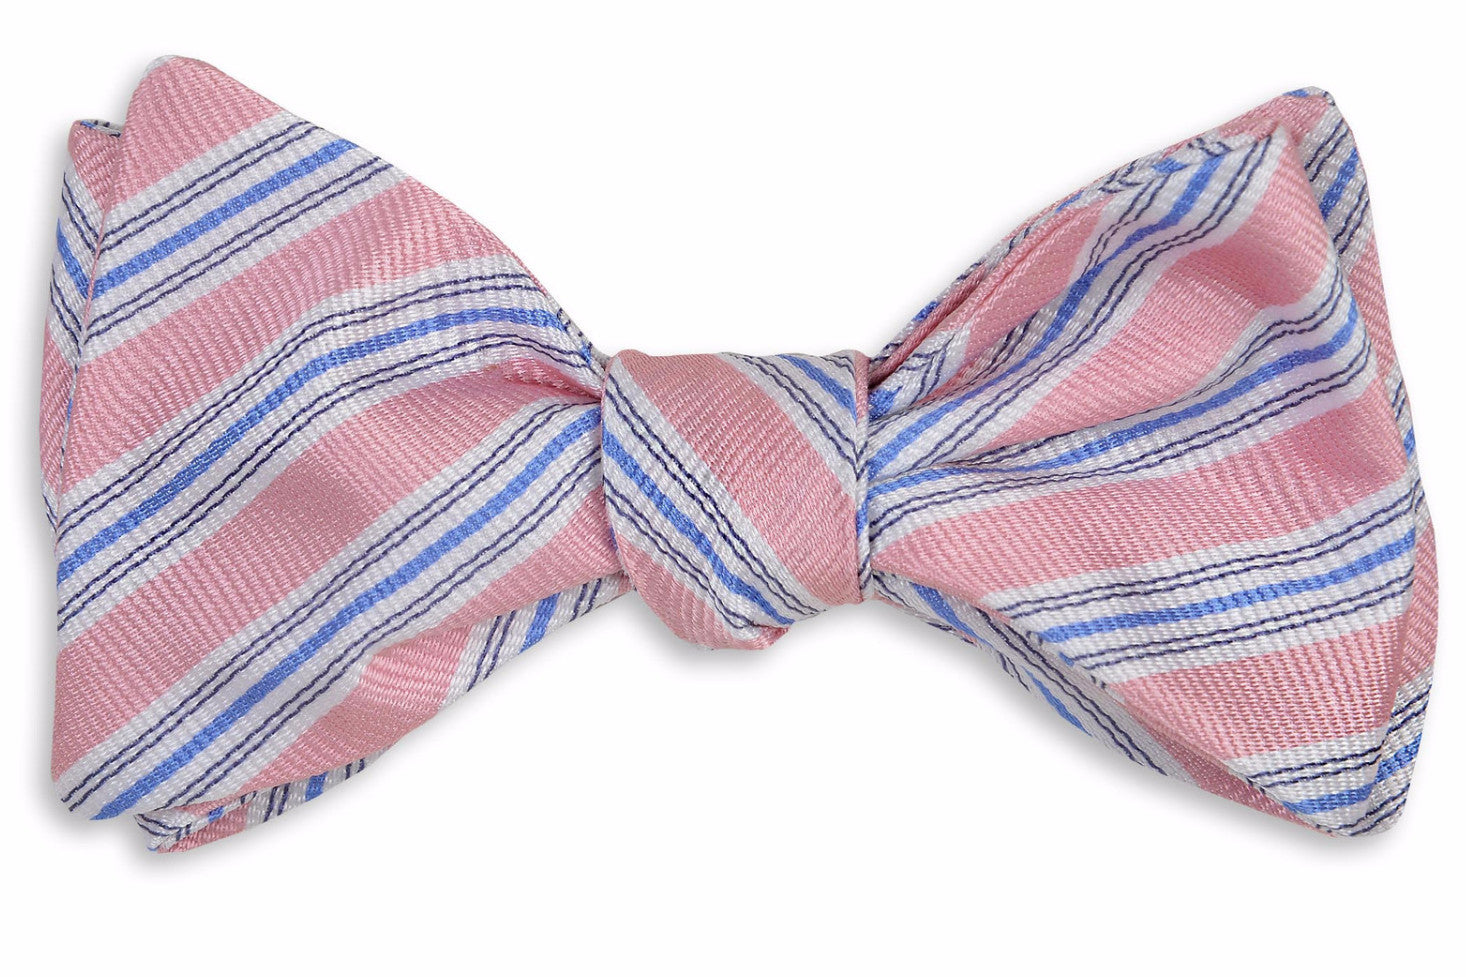 Men's pink bow tie. 100% silk with a blue and white striped design.